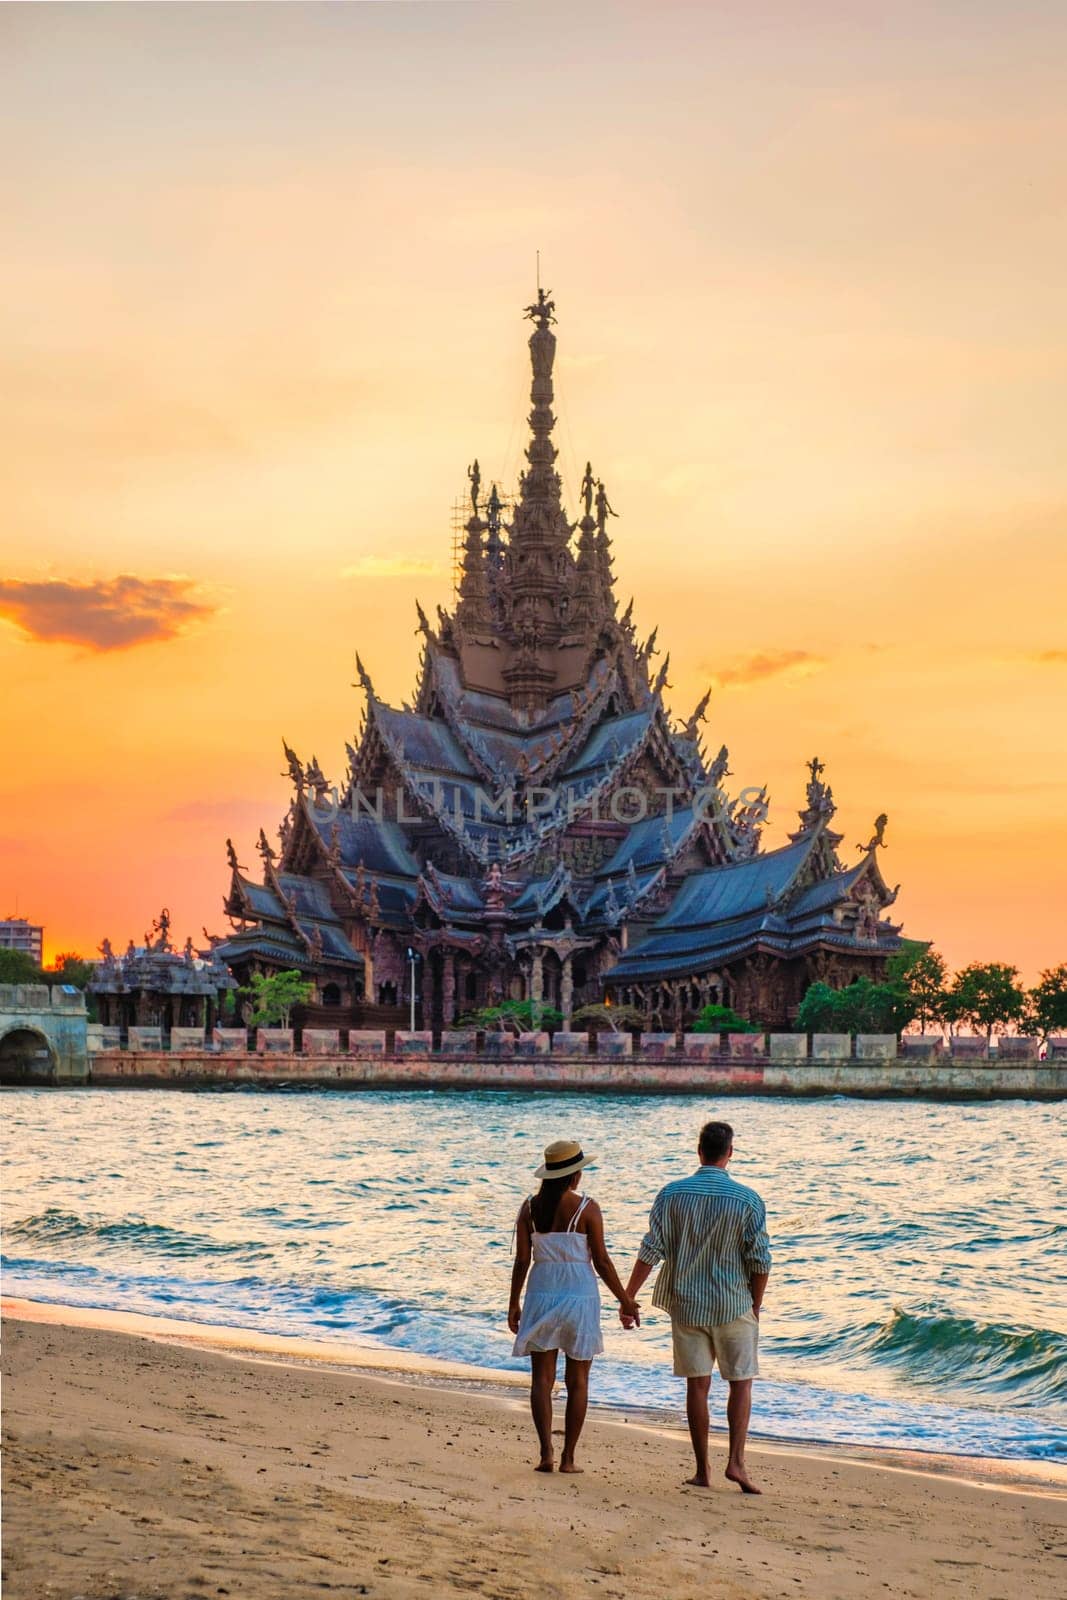 A diverse multiethnic couple of men and women visit The Sanctuary of Truth wooden temple in Pattaya Thailand at sunset on the beach looking at the wooden temple at dusk